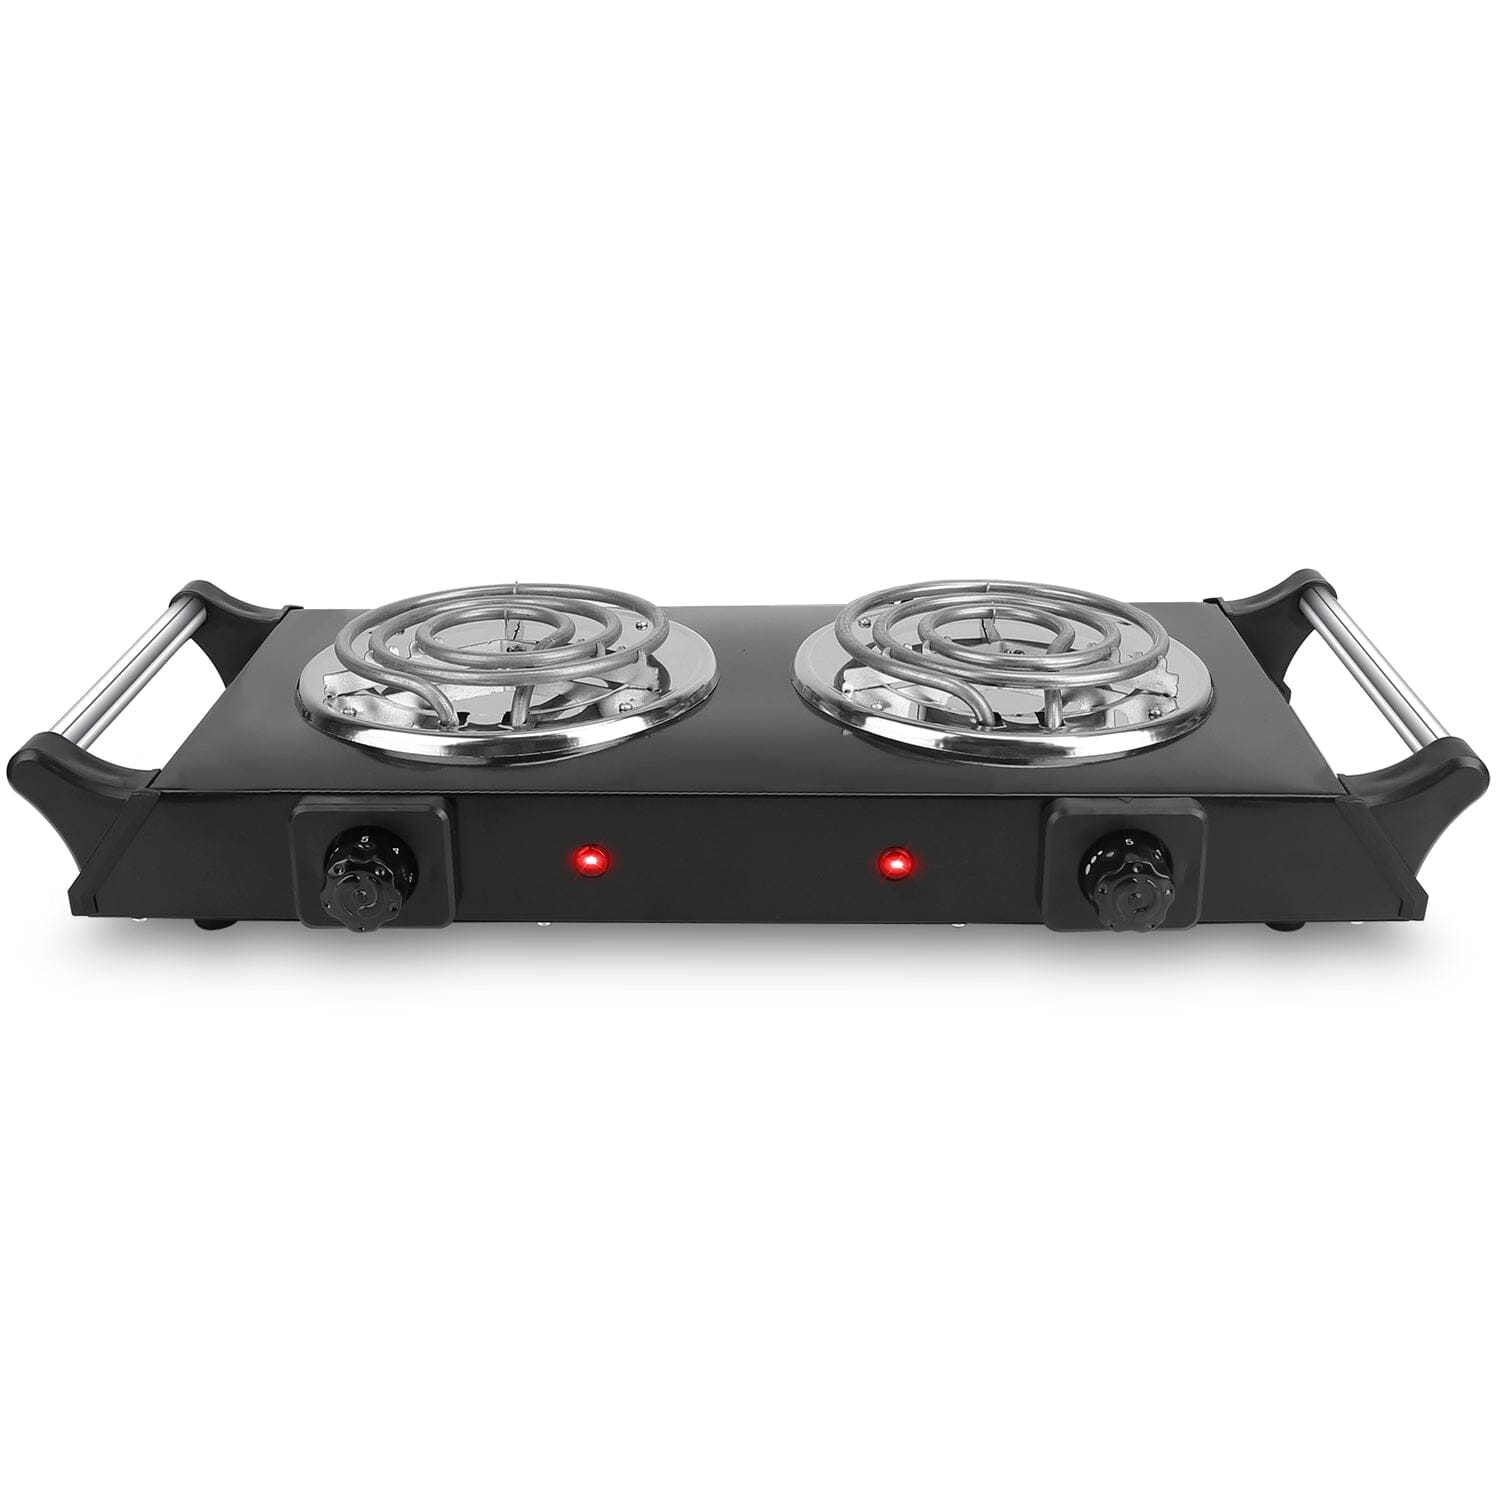 Countertop Coil Hotplate Electric Stove Cooktop Double Flat